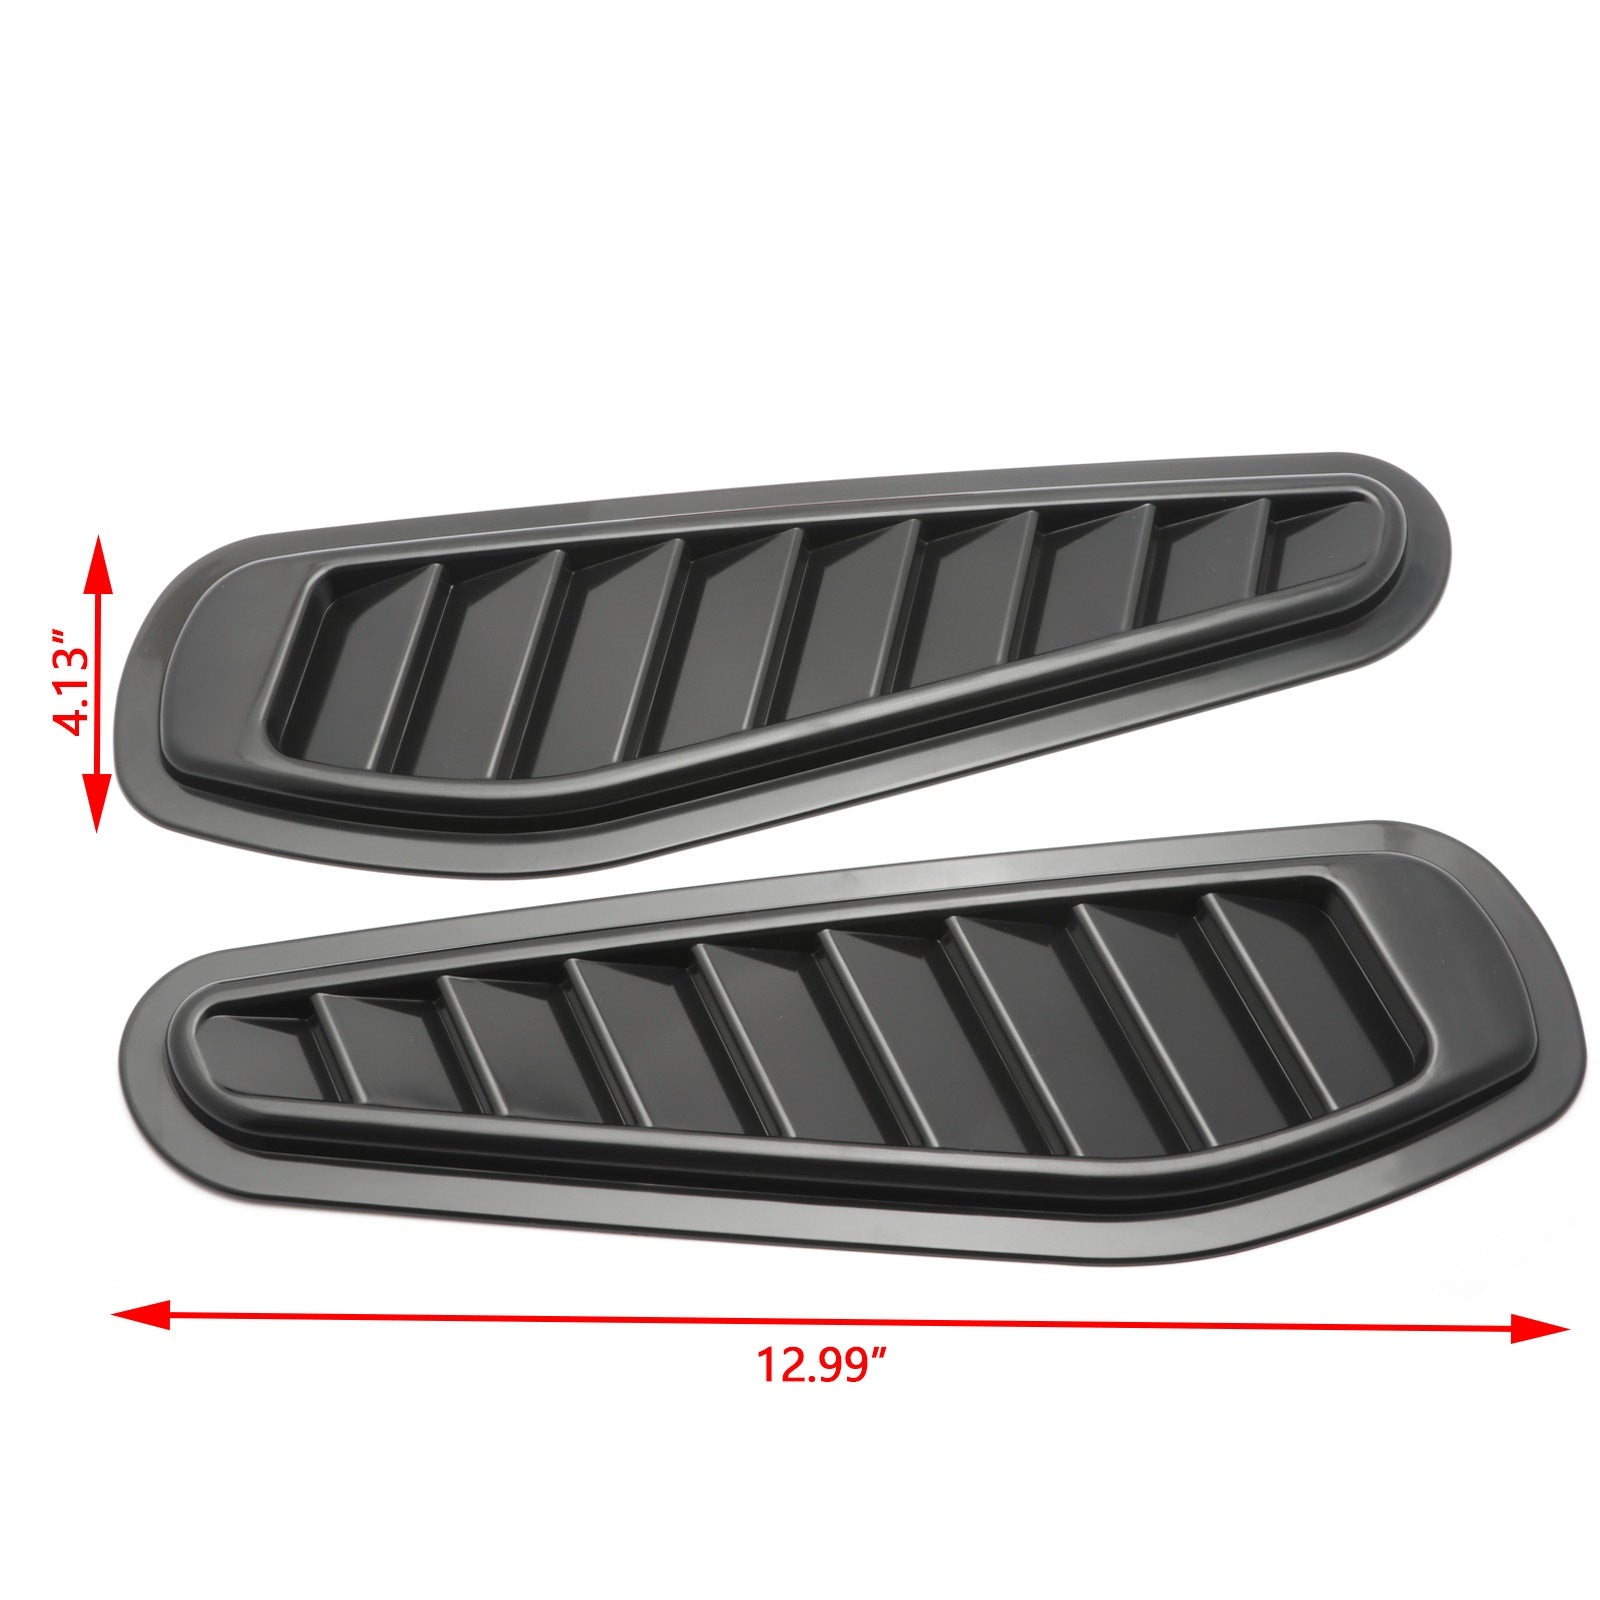 Matte Black ABS Car Headlight Intake Duct Scoop Bonnet Hood Vent Louver  Cooling Panel Trim Set 17x5 Inches 206Y From Ai810, $17.69